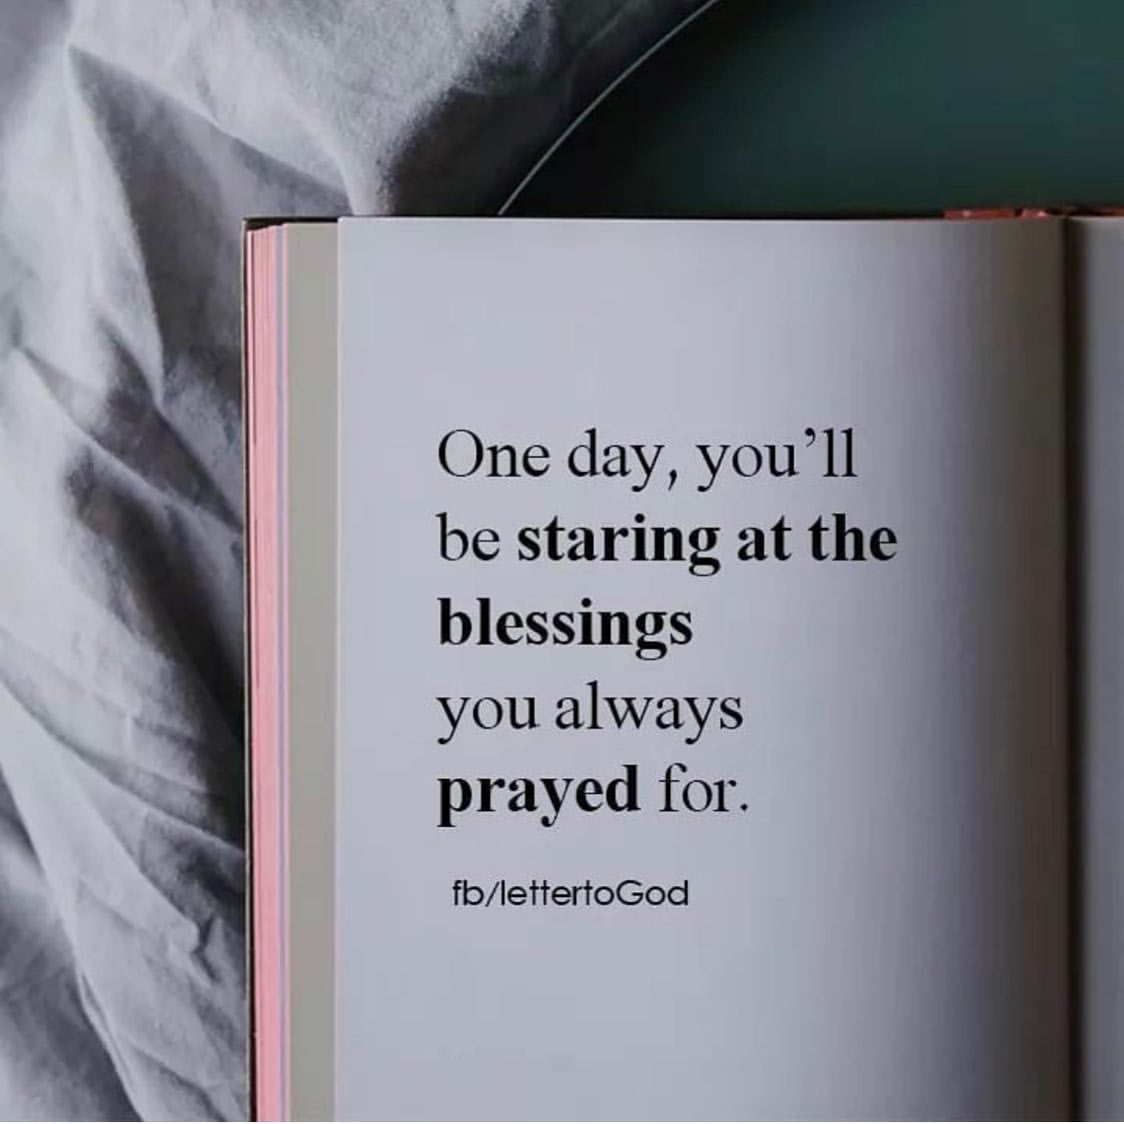 One day, you'll be staring at the blessings you always prayed for ...